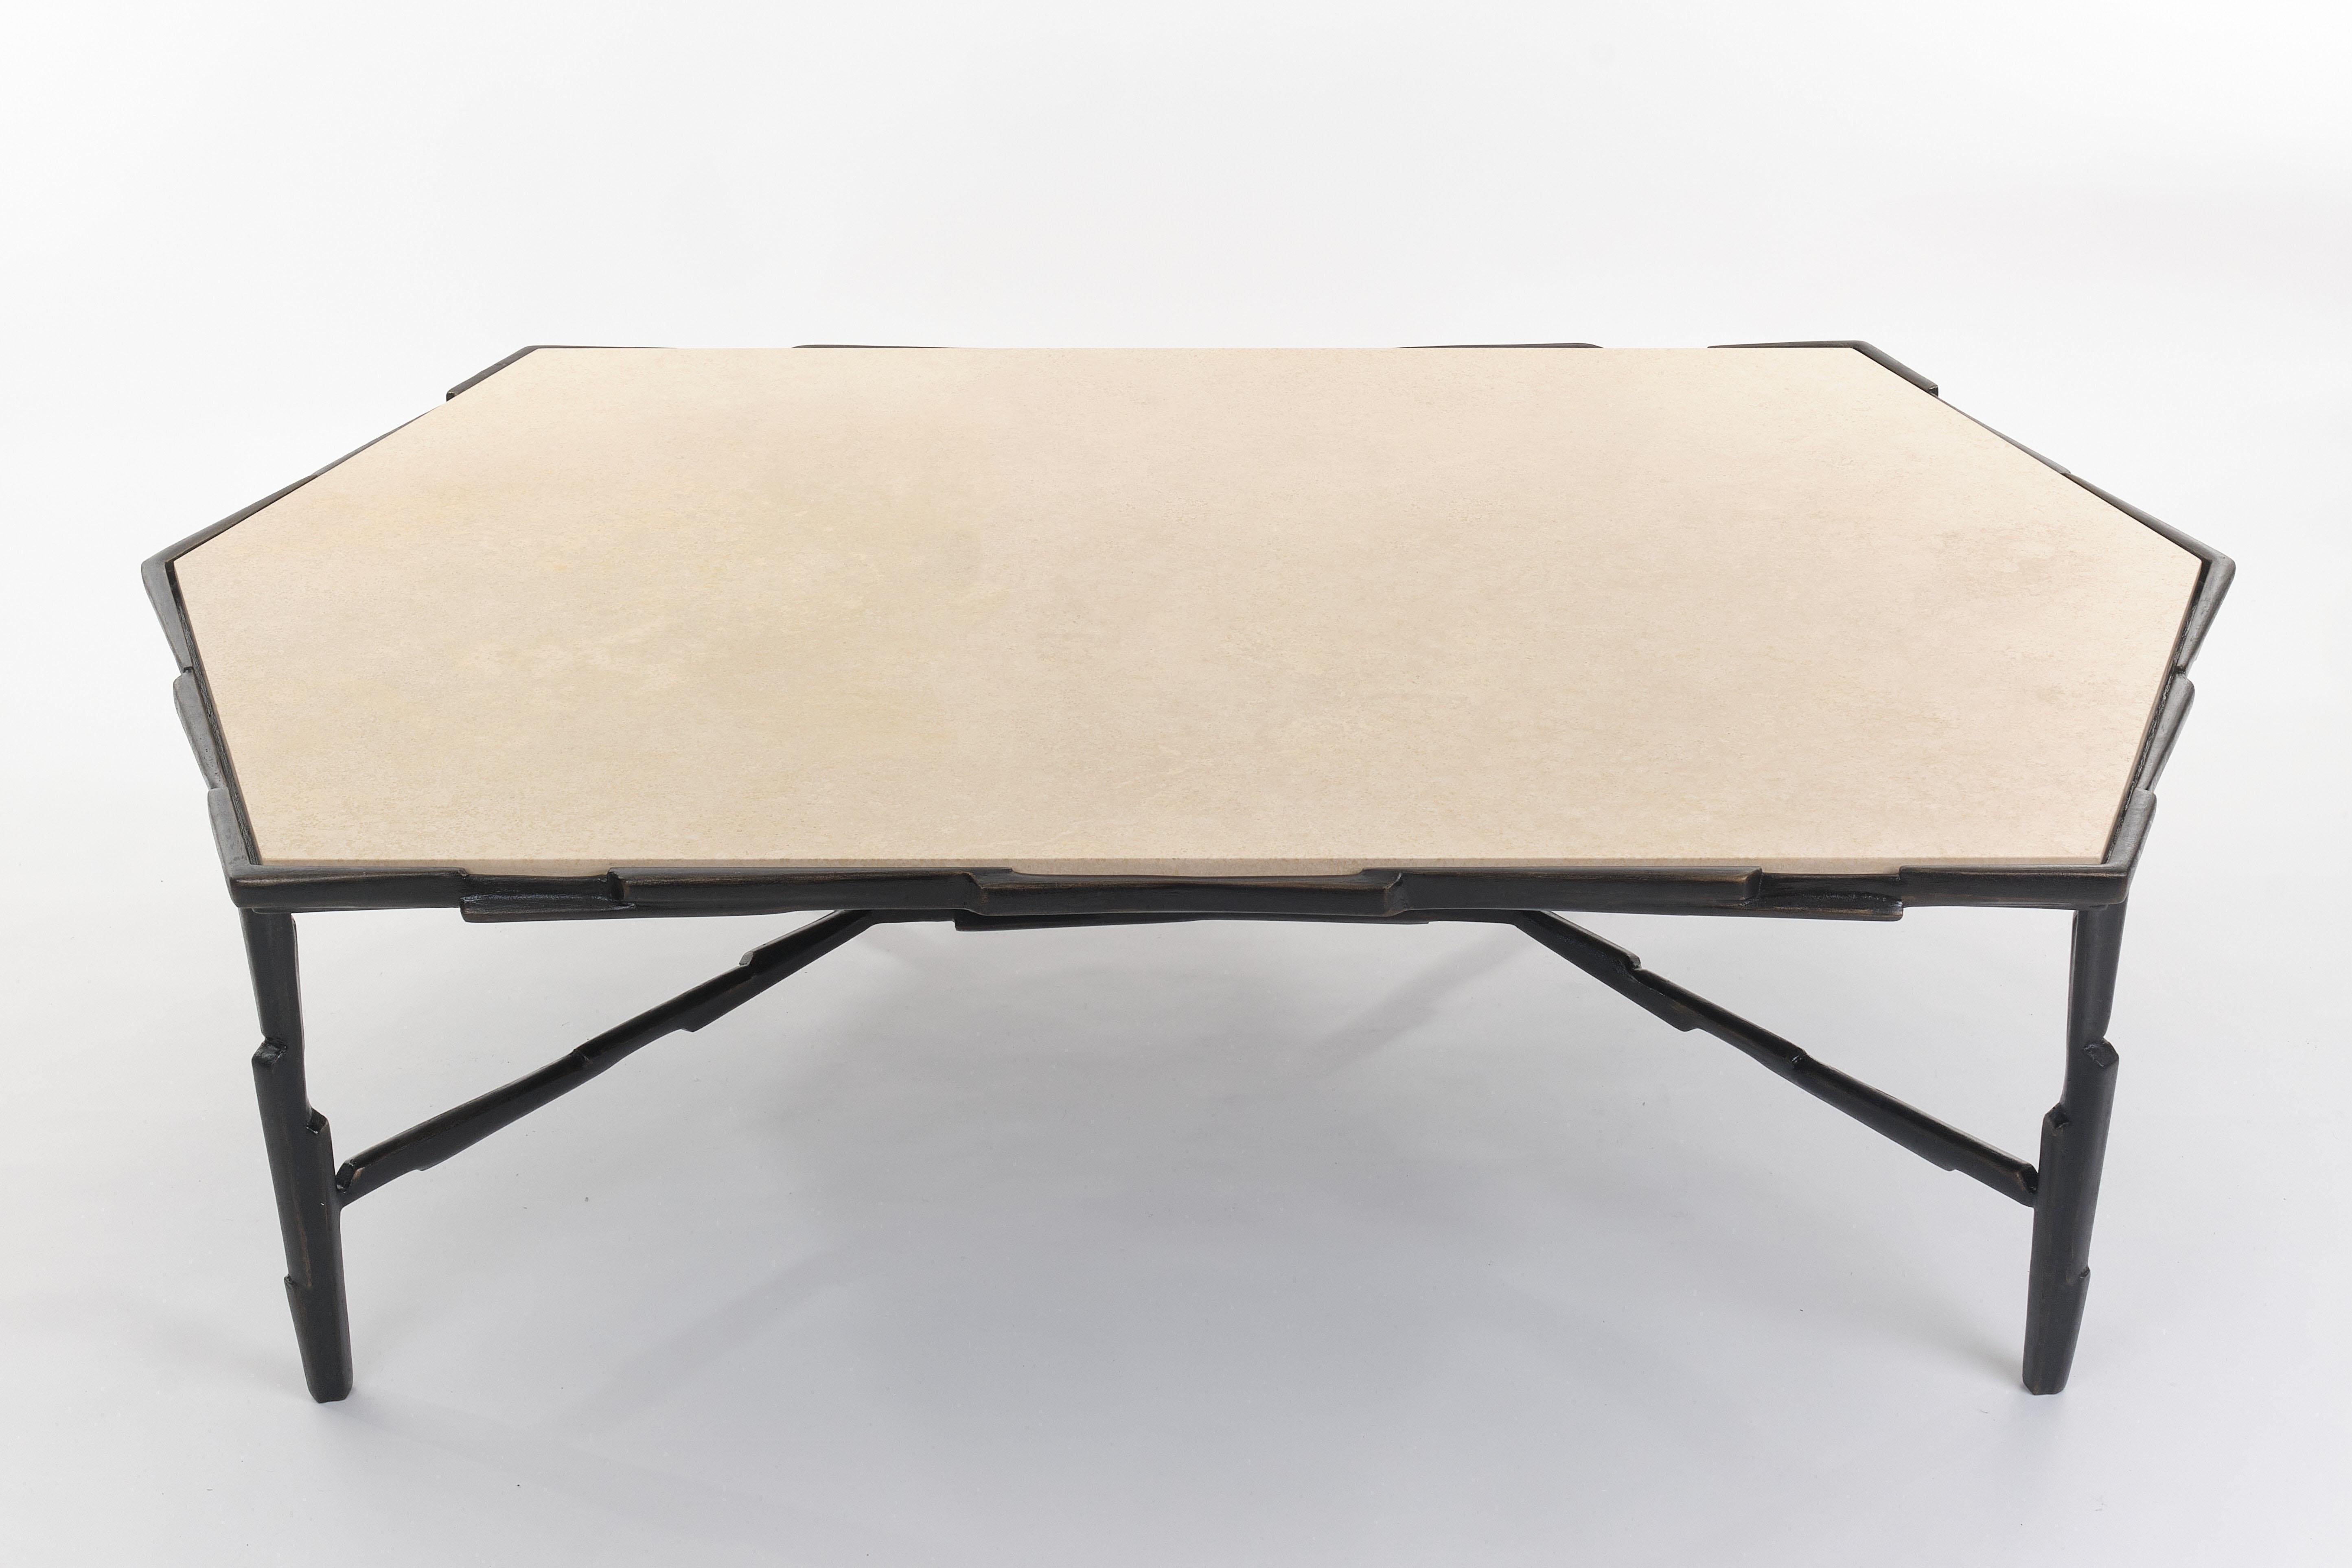 The LINEA coffee table has a strong and dynamic silhouette based on the figure of the triangle. Fragments of metal, shaped and assembled in line with a secret sense of order. Each piece is individually hand sculpted in plaster and unique by its